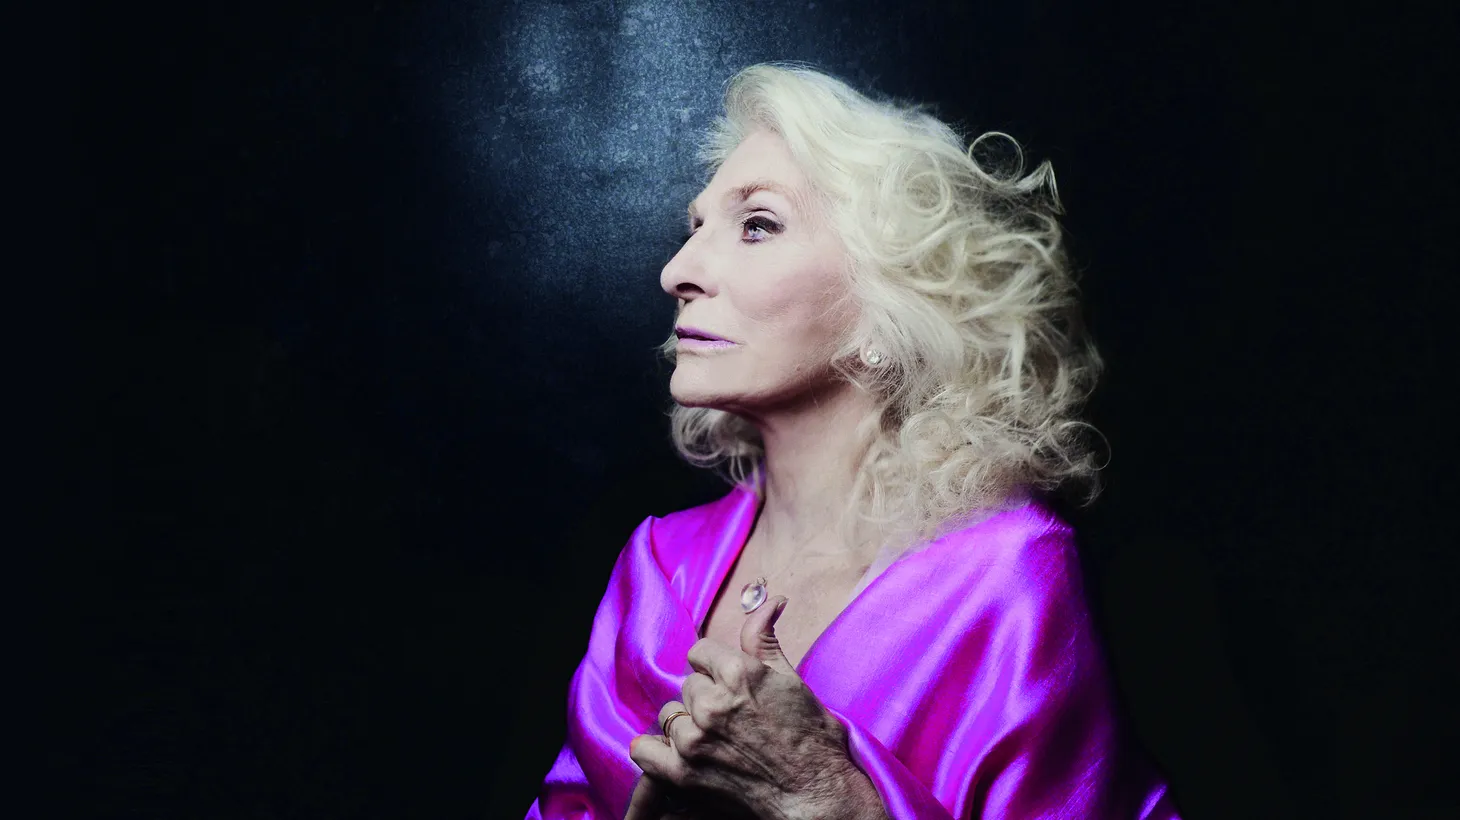 Singer-songwriter Judy Collins released her first album of all original songs at 82 years old.